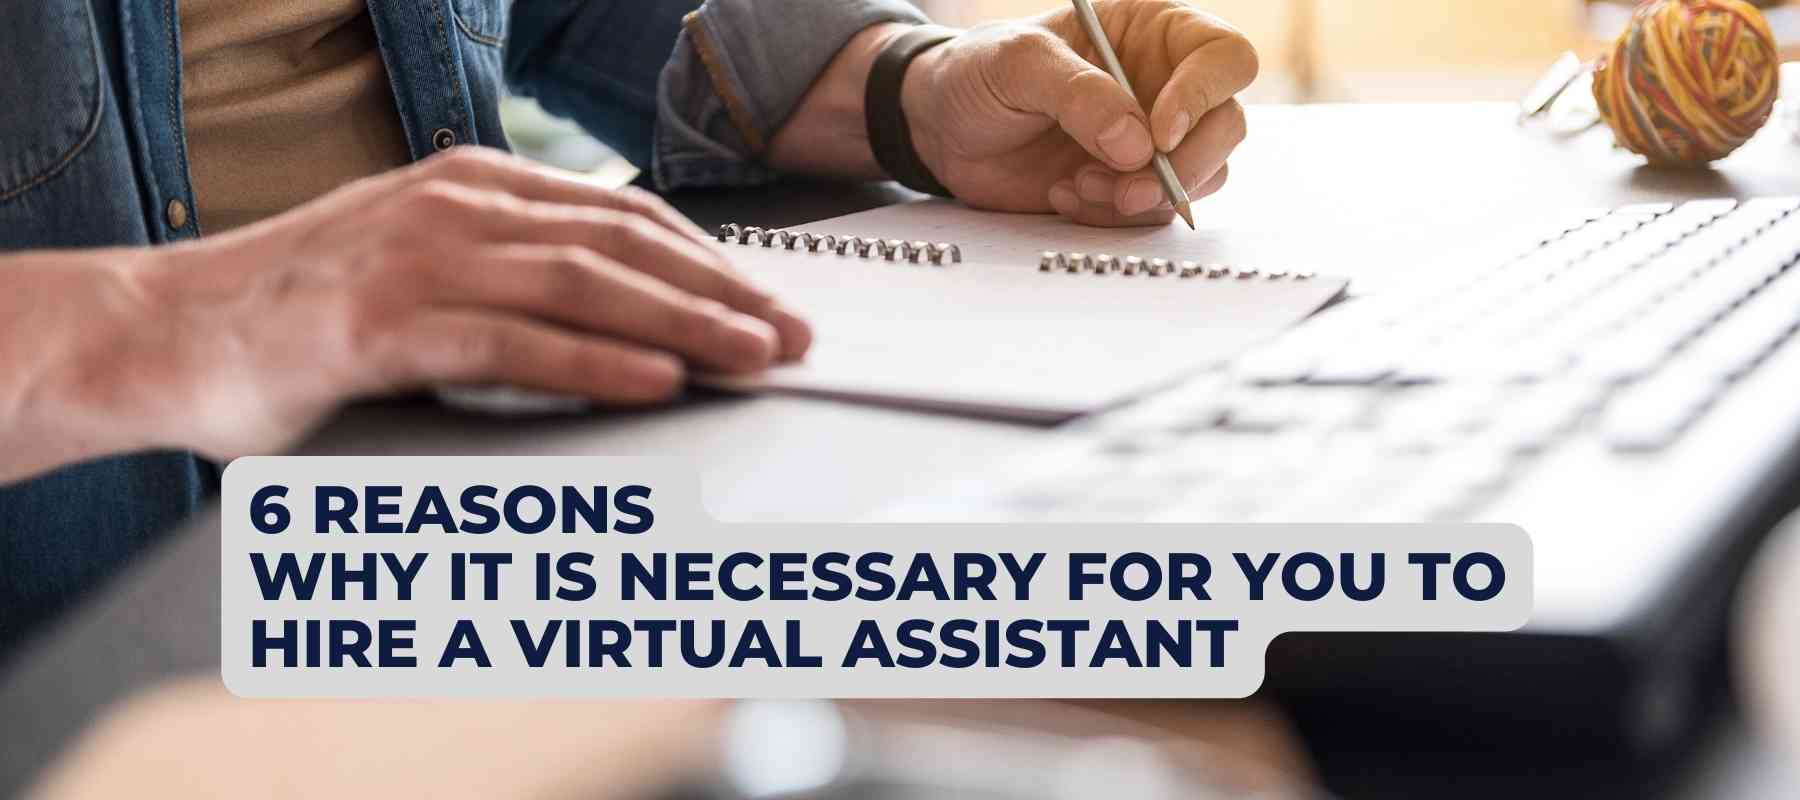 6 reasons why it is necessary for you to hire a virtual assistant